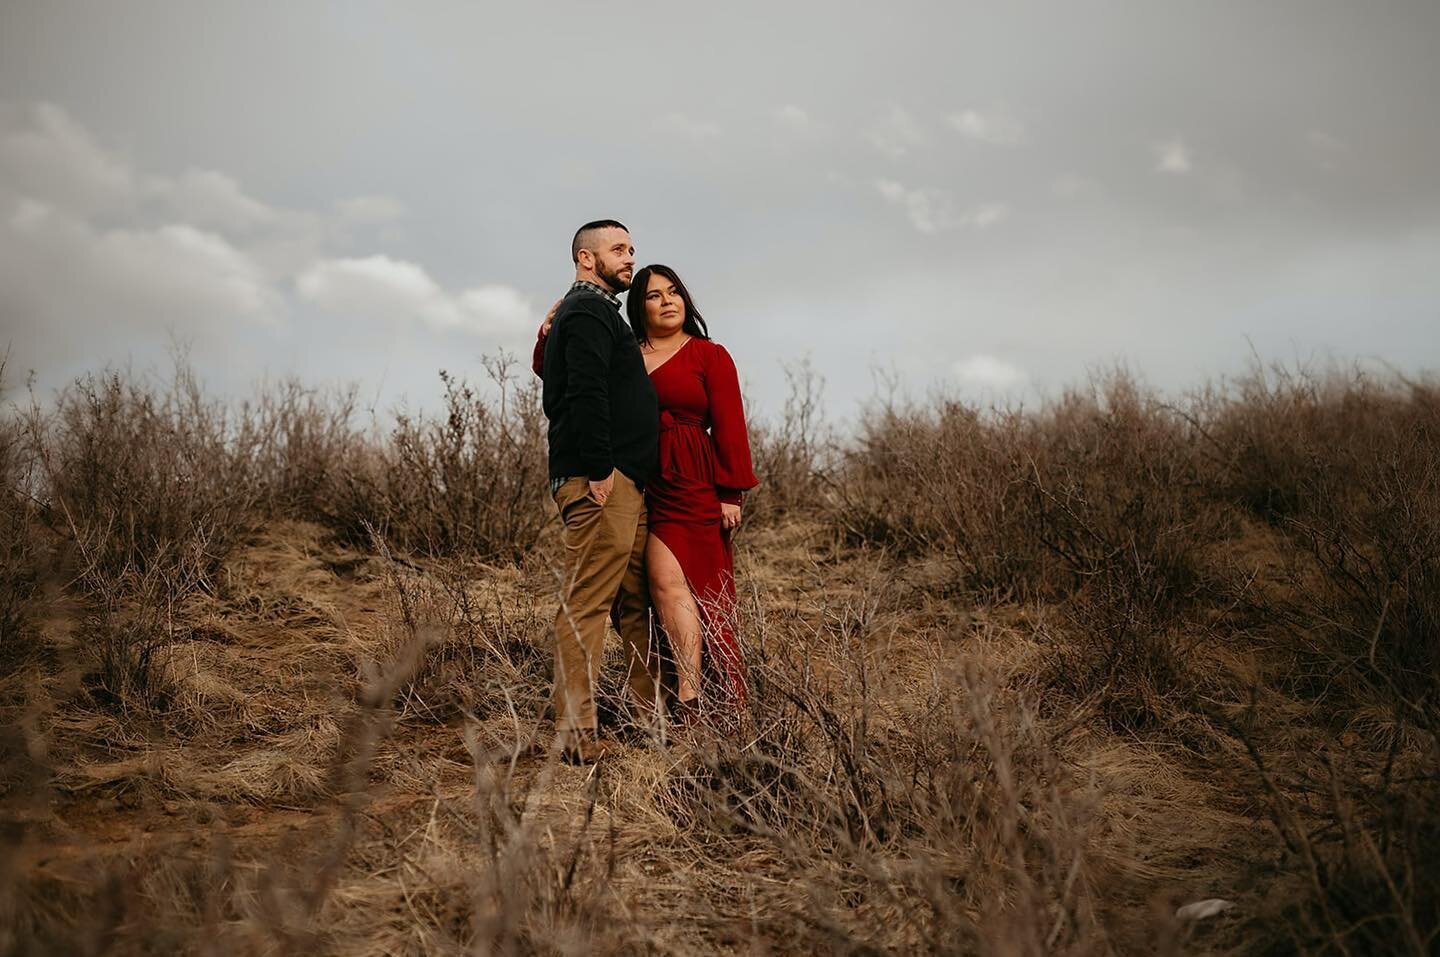 Angela and Chad drove up from Texas to Celebrate their anniversary and do this session. They had never been to Colorado before! So I was excited talk about all that Colorado had to offer, share my favorite places to visit, and well, let this beautifu